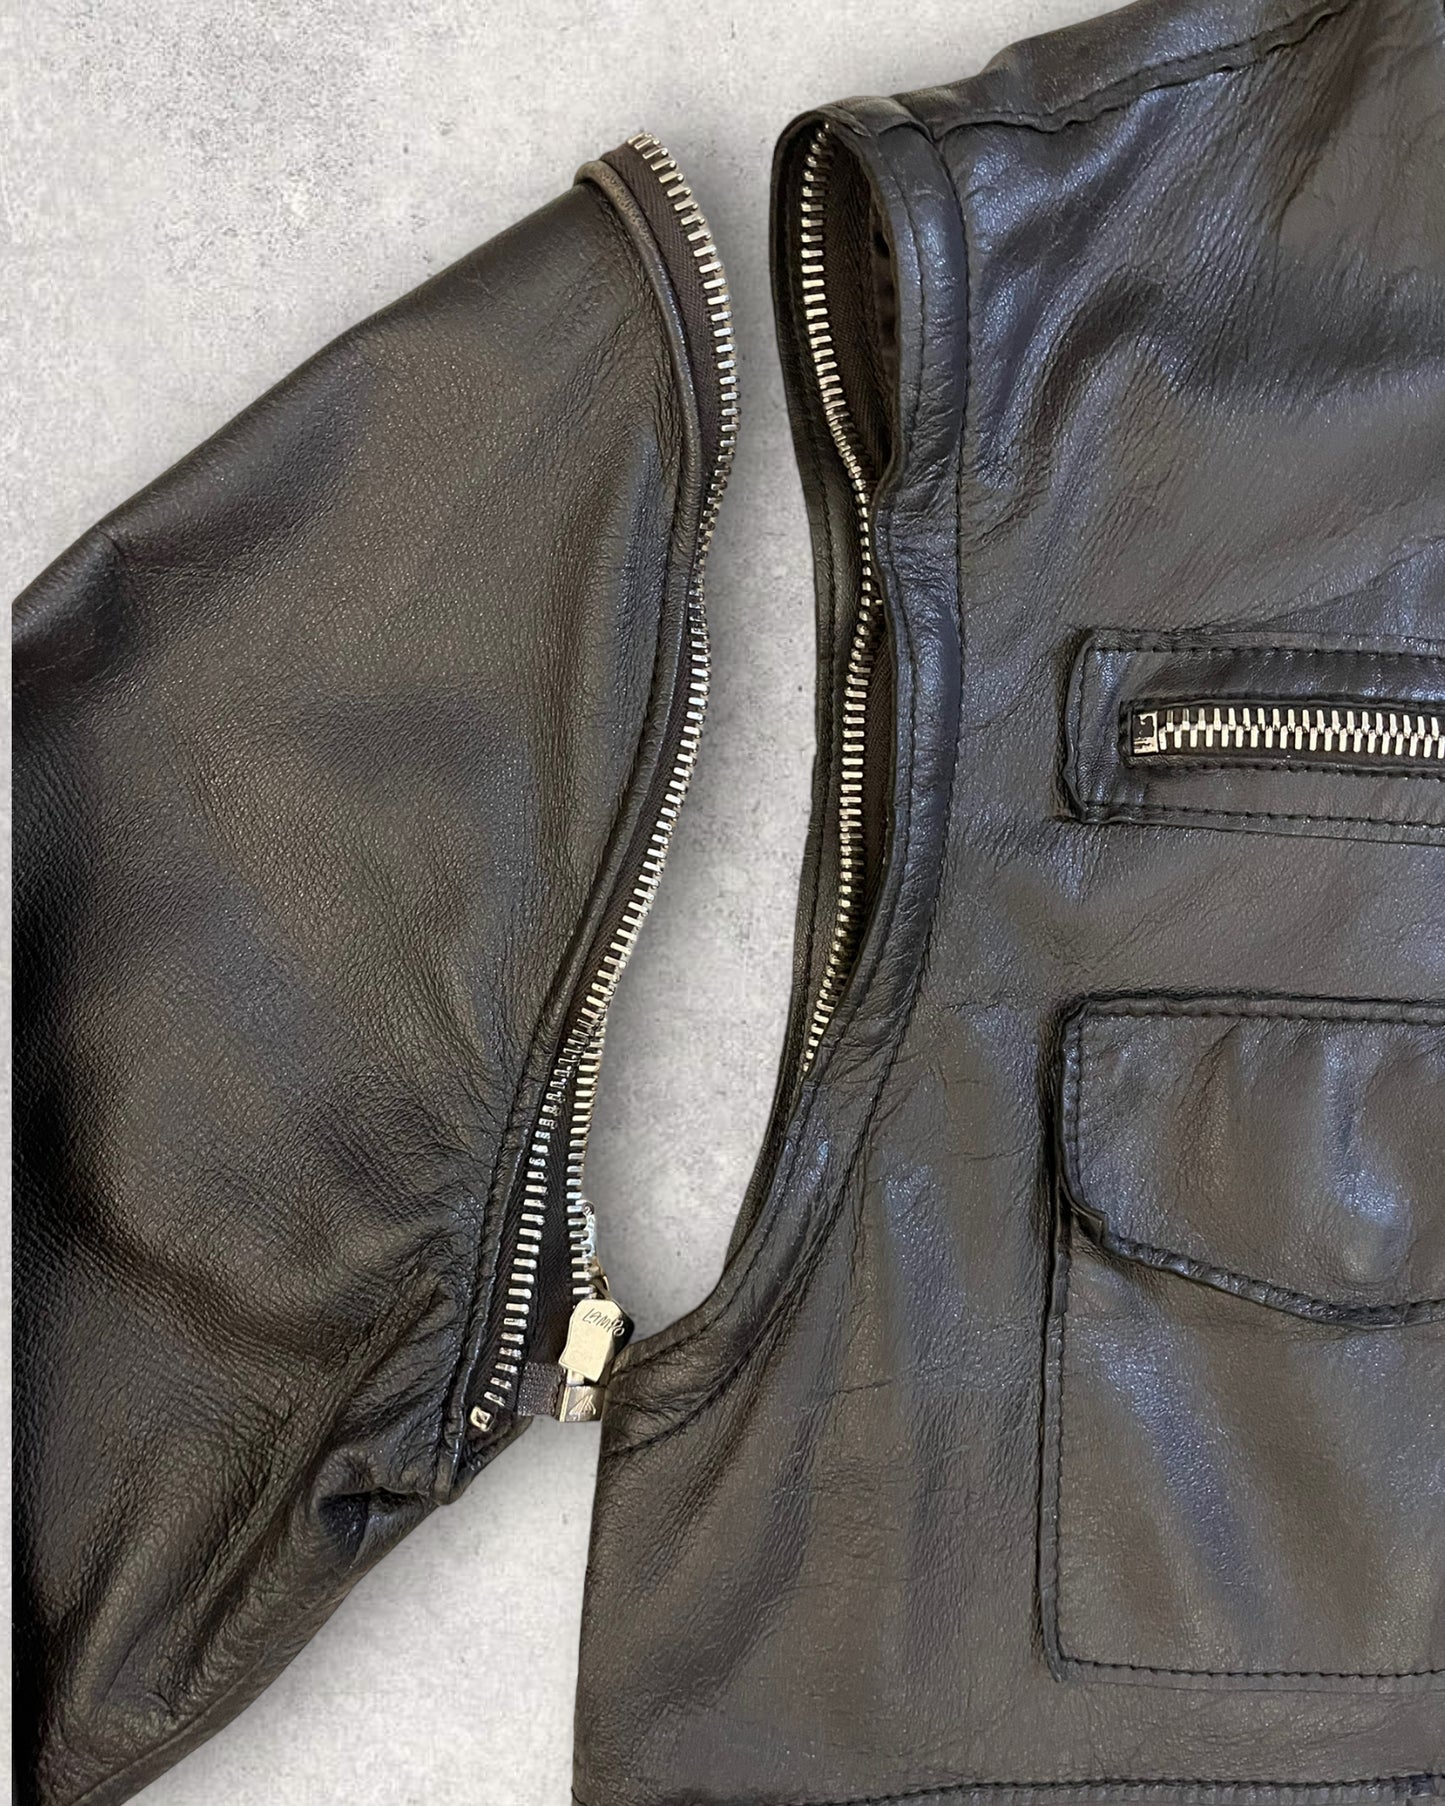 00s Dolce & Gabbana Leather Jacket with Detachable Arms (L)